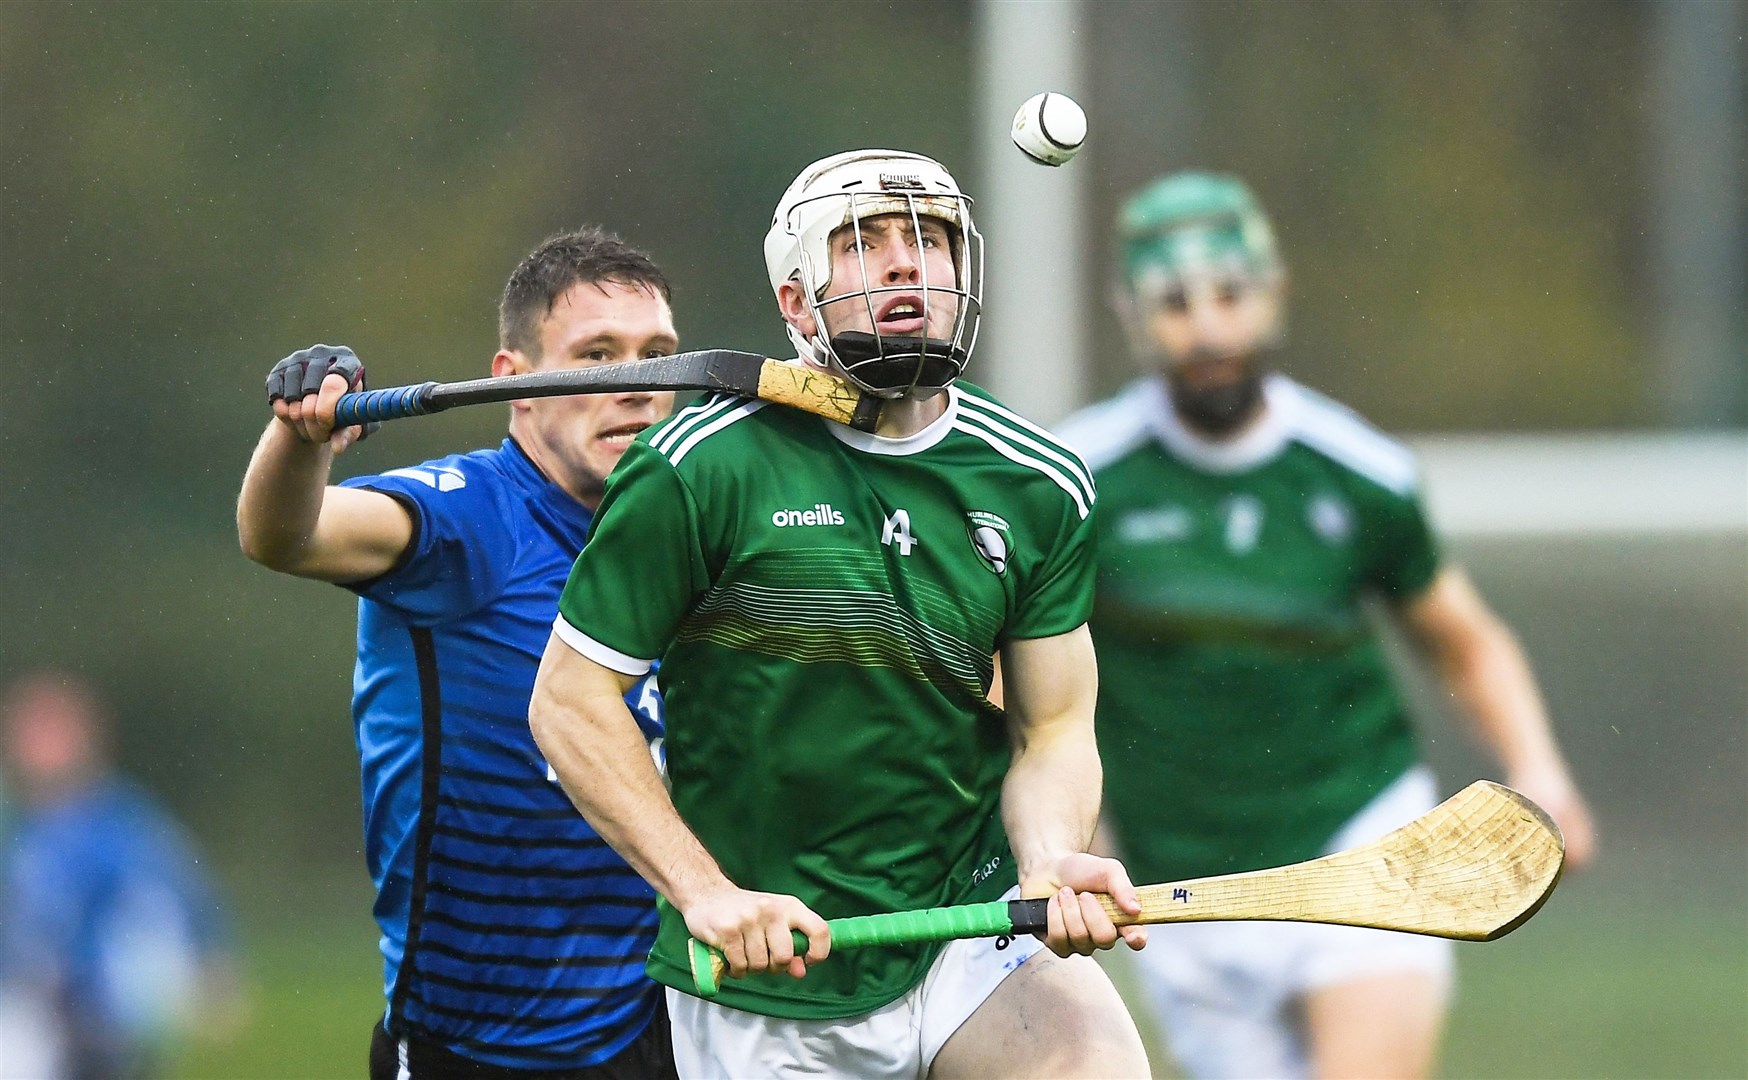 Shane McGovern of Ireland in action against Daniel Grieve of Scotland during the Senior Hurling Shinty International 2019 match between Ireland and Scotland at the GAA National Games Development Centre in Abbotstown, Dublin. Photo by Piaras Ó Mídheach/Sportsfile